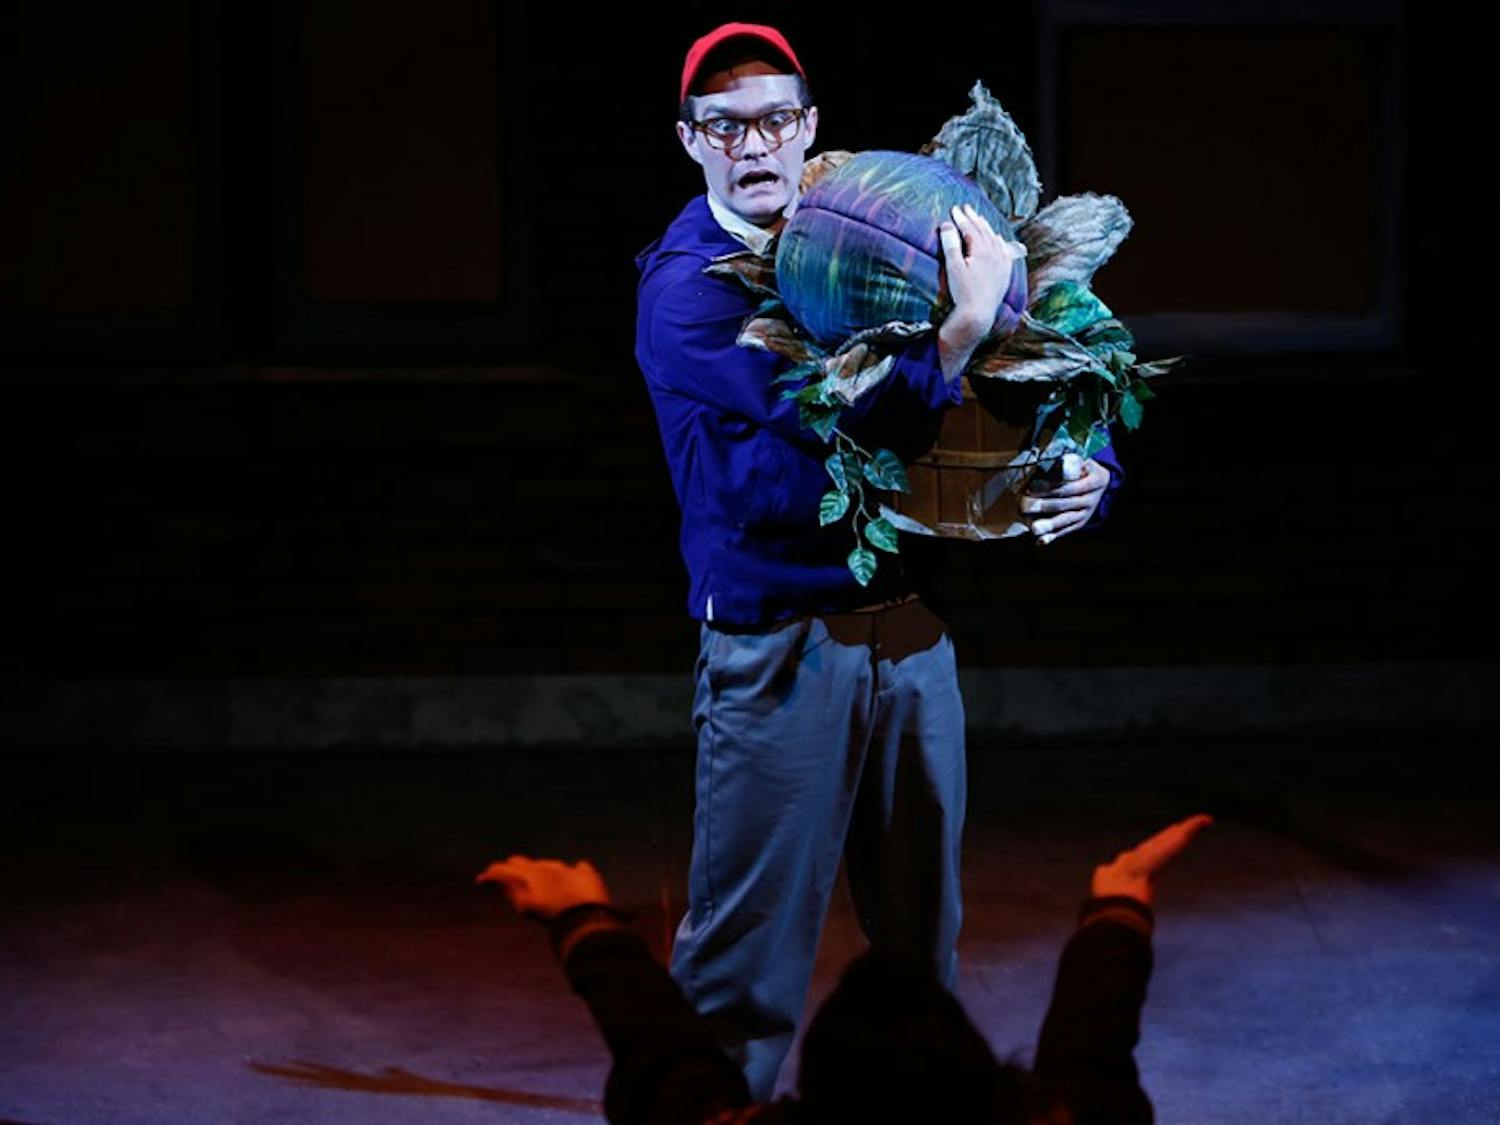 With comical performances and a bizarre plant that talks and sings, “Little Shop of Horrors” has it all.